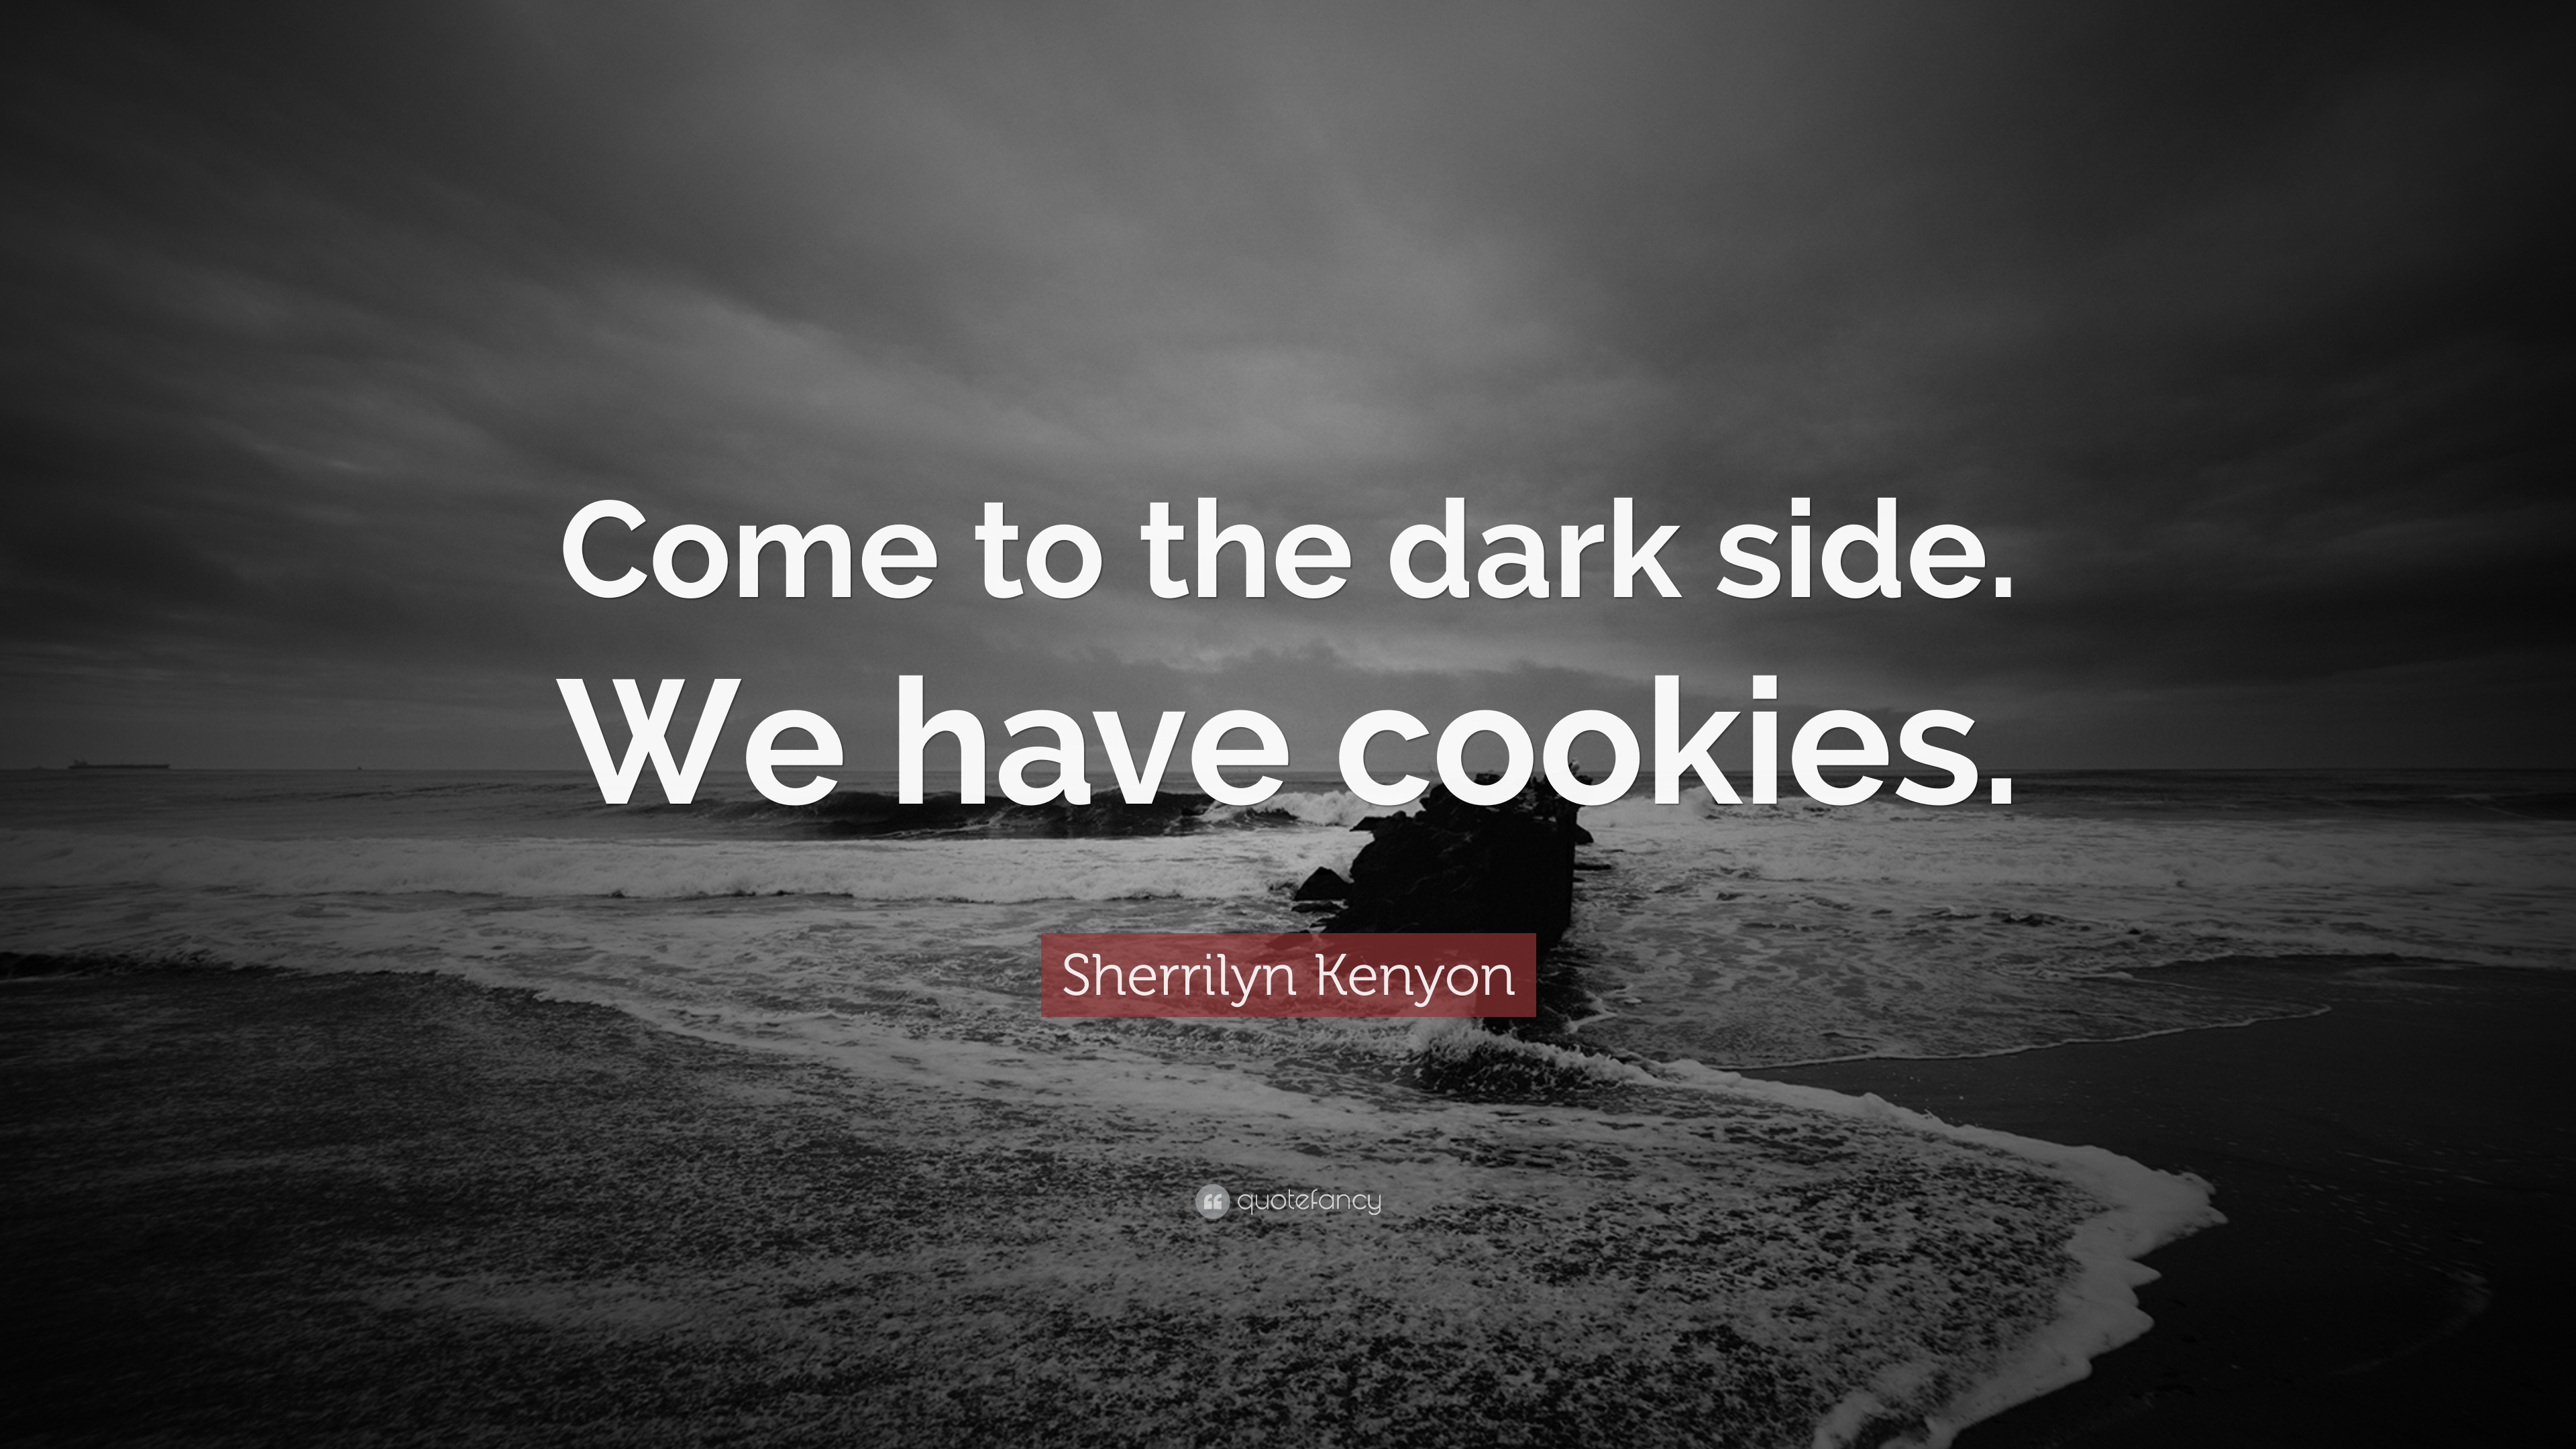 Sherrilyn Kenyon Quote: “Come to the dark side. We have